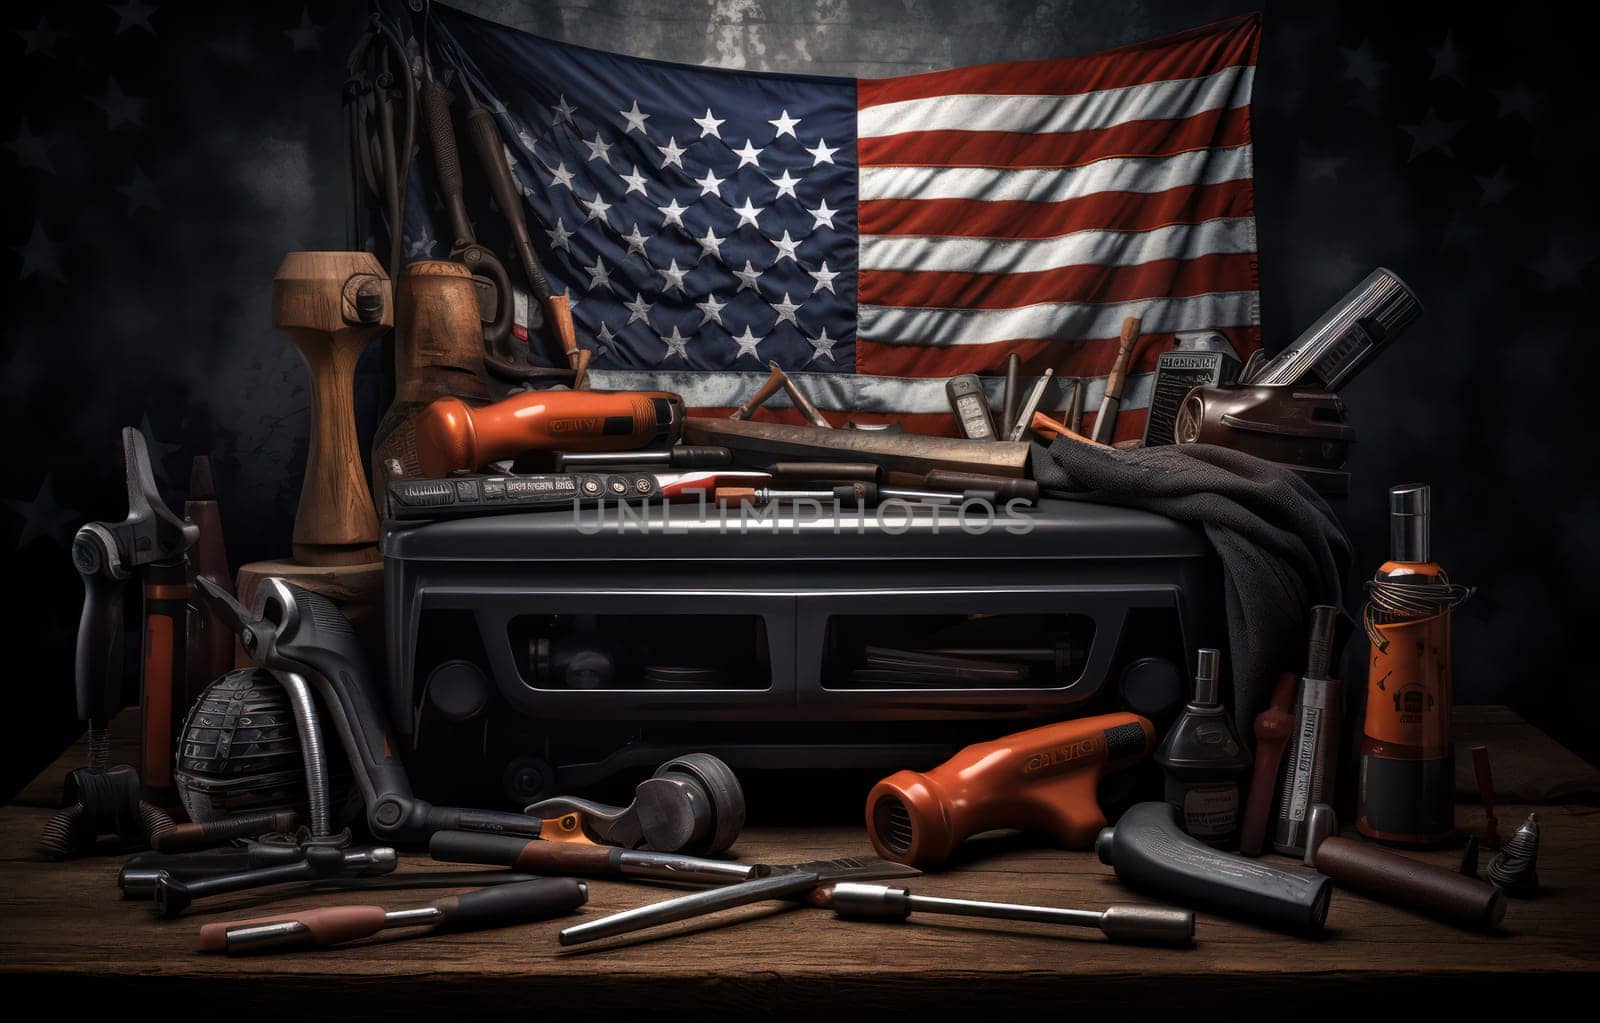 United Labor: Celebrating American Workforce with Patriotic Tools on Labor Day - A Symbolic National Image of Industrial Construction Equipment on Wooden Table with Flag Background